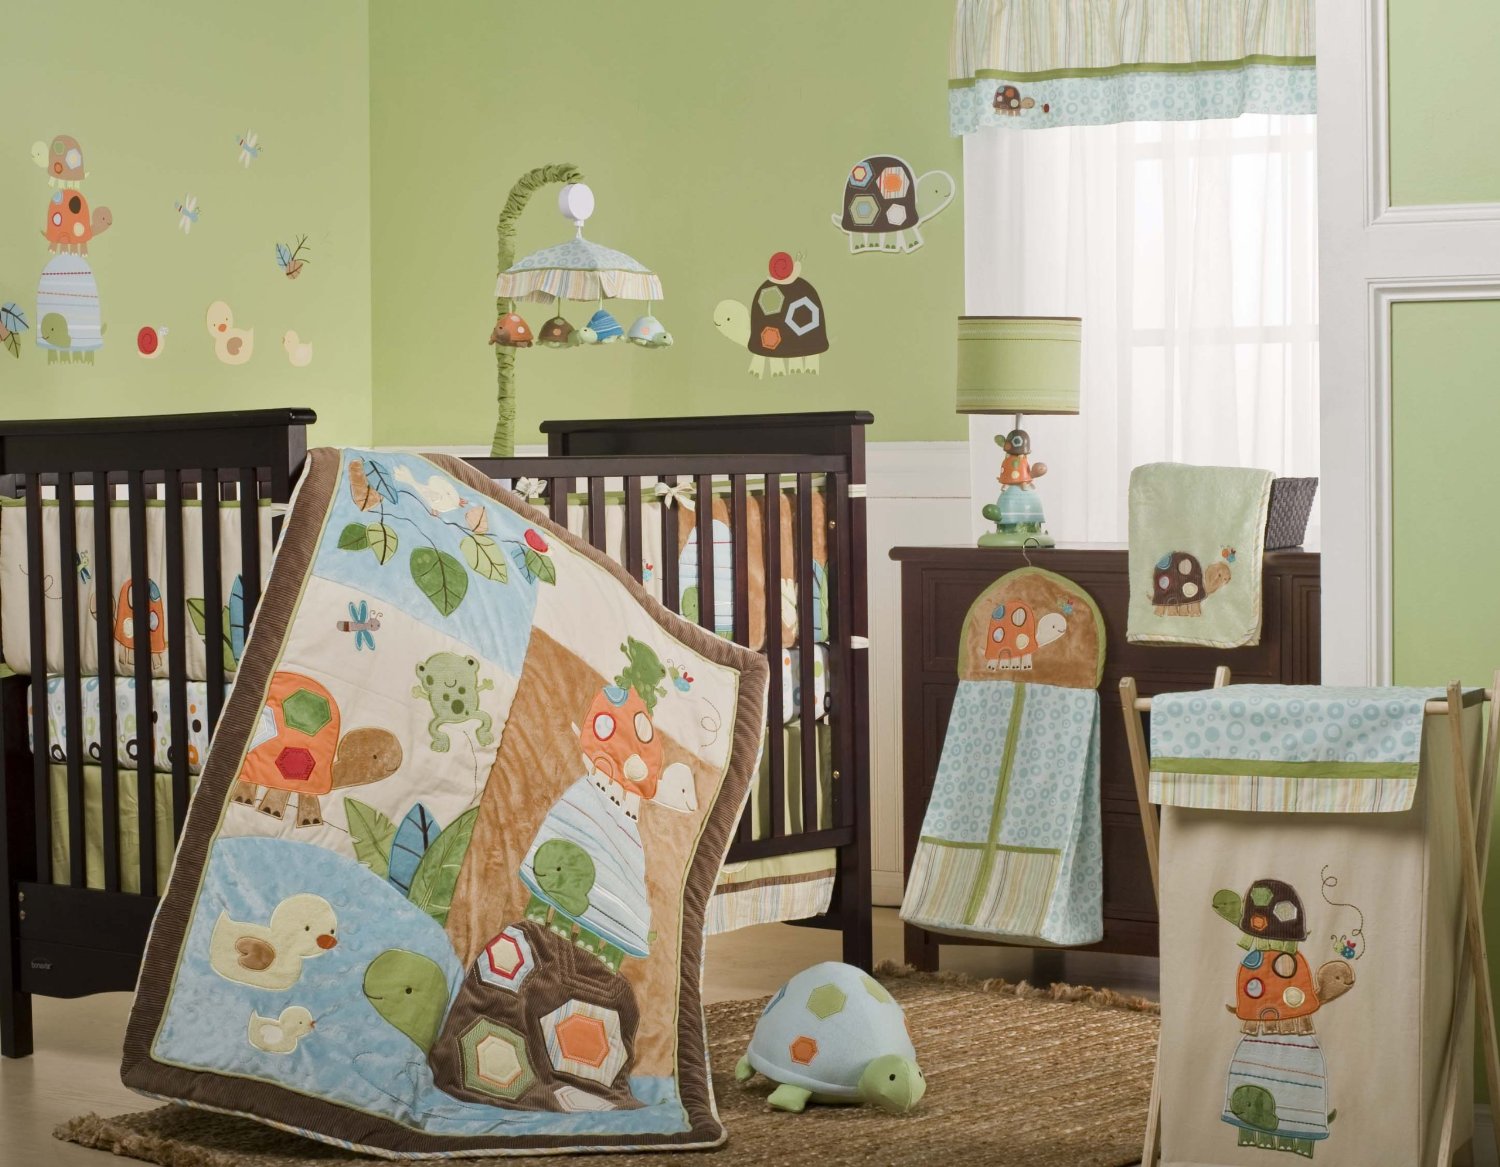 carter's baby furniture